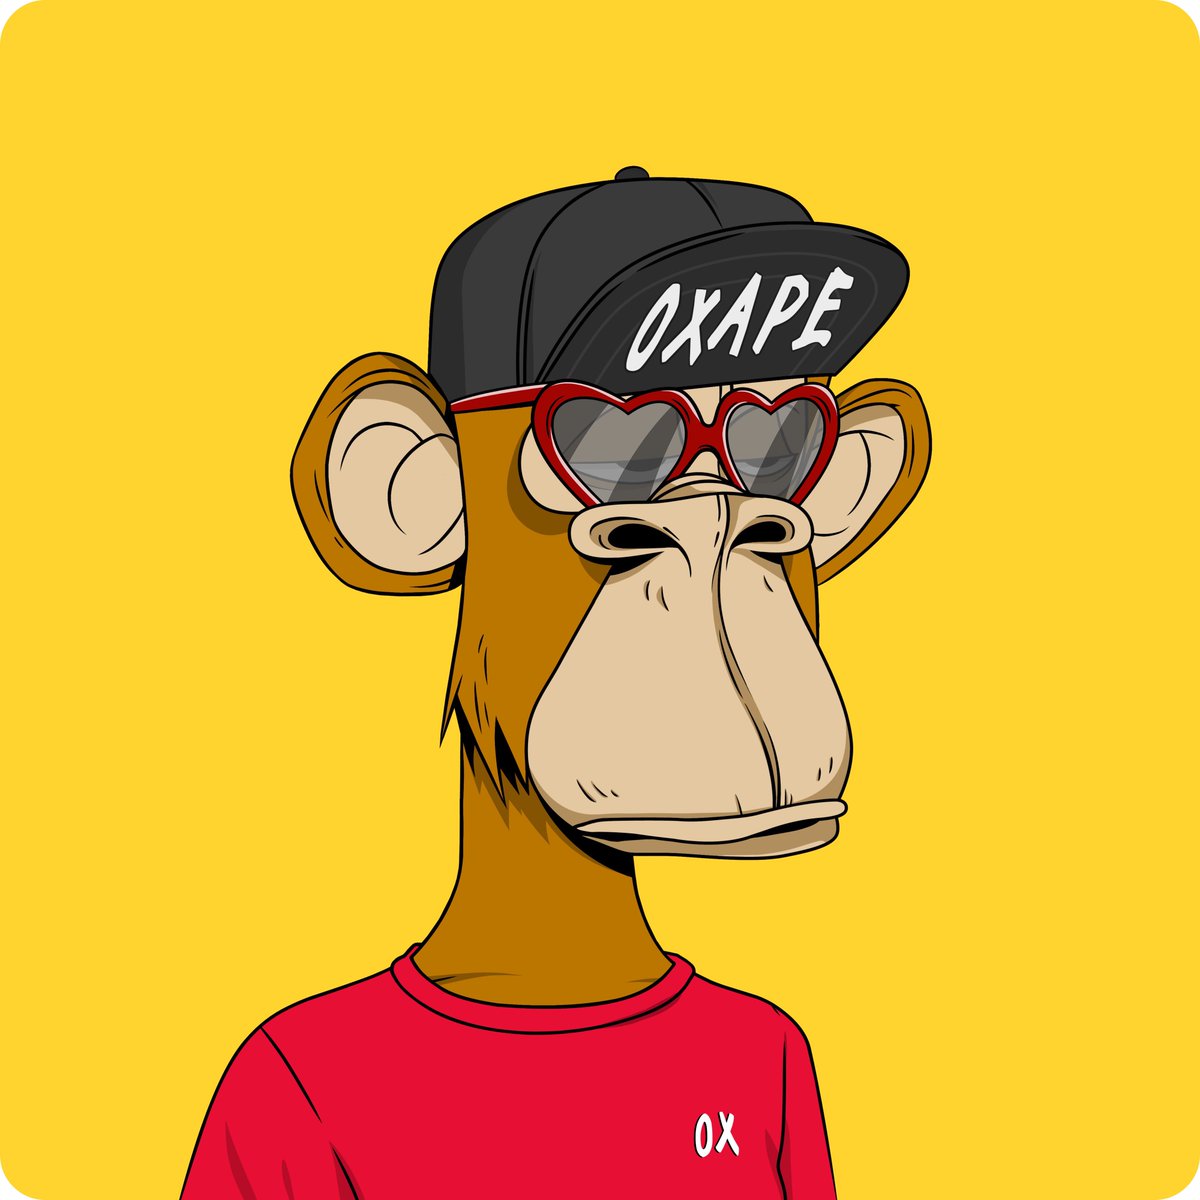 @NICOBAR_86 @0xApes_NFT @tribeodyssey Congrats! Nice ape and welcome!